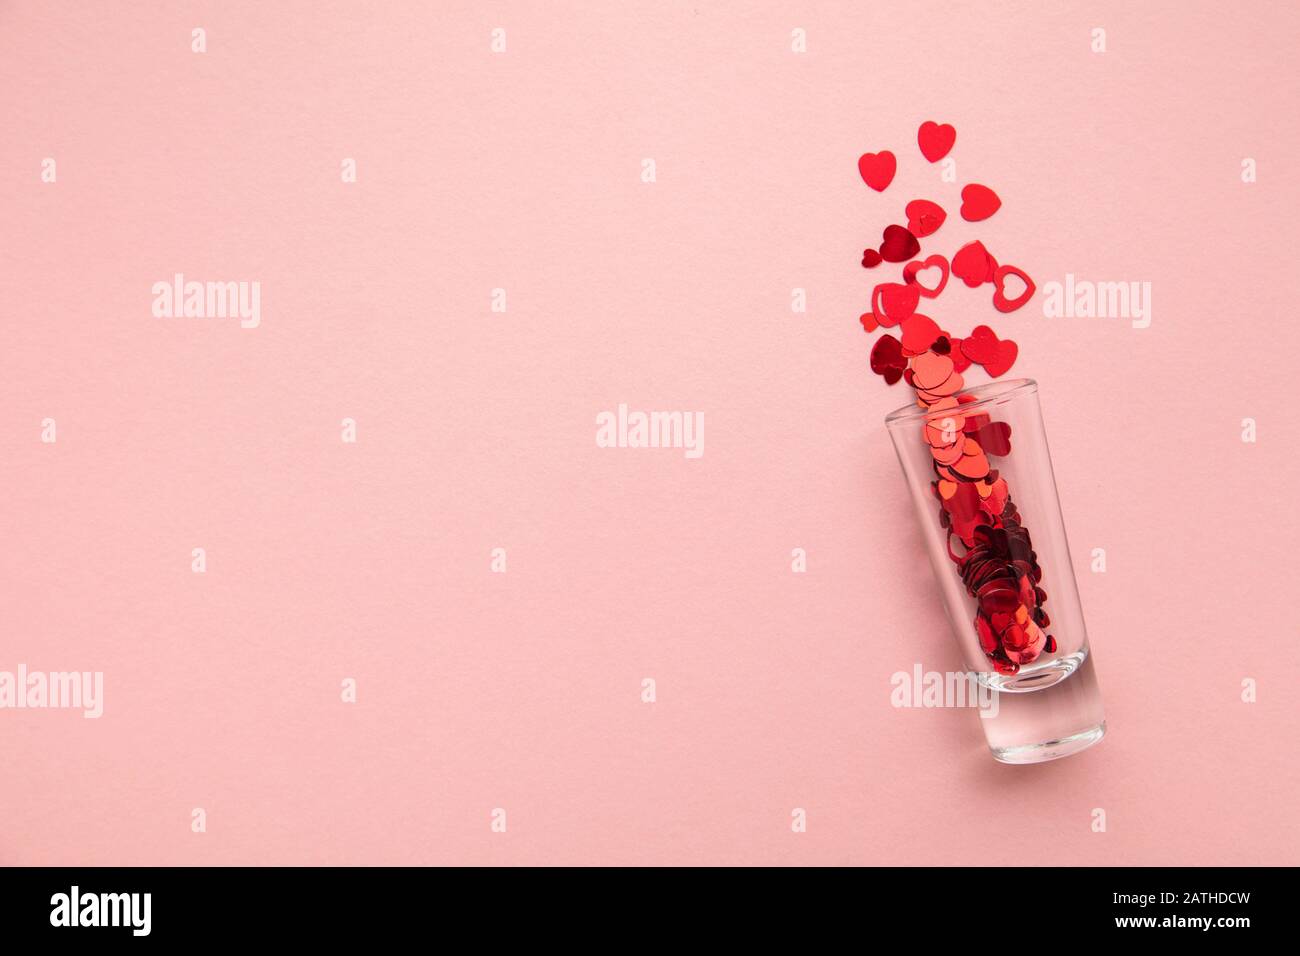 Valentine's day shots. Shot glass with heart confetti on pastel pink background Stock Photo